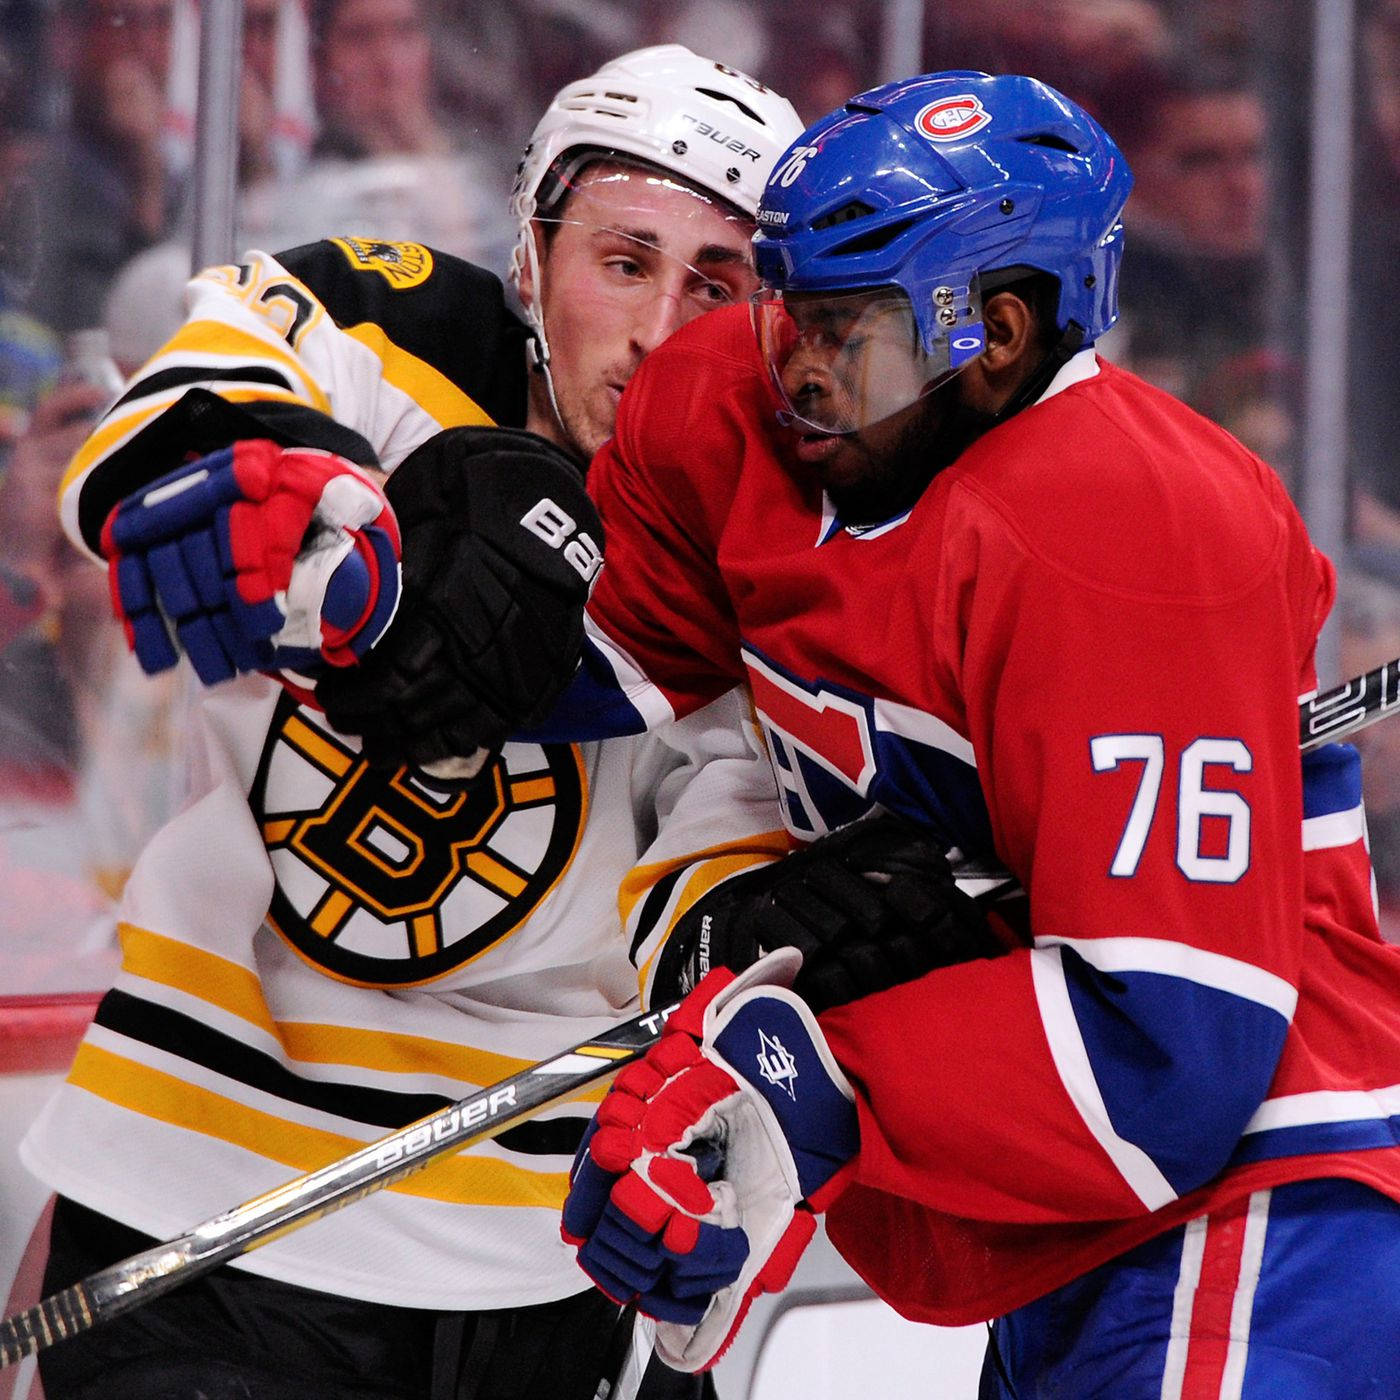 Boston Bruins forward Brad Marchand in a face-off against P.K. Subban. Wallpaper